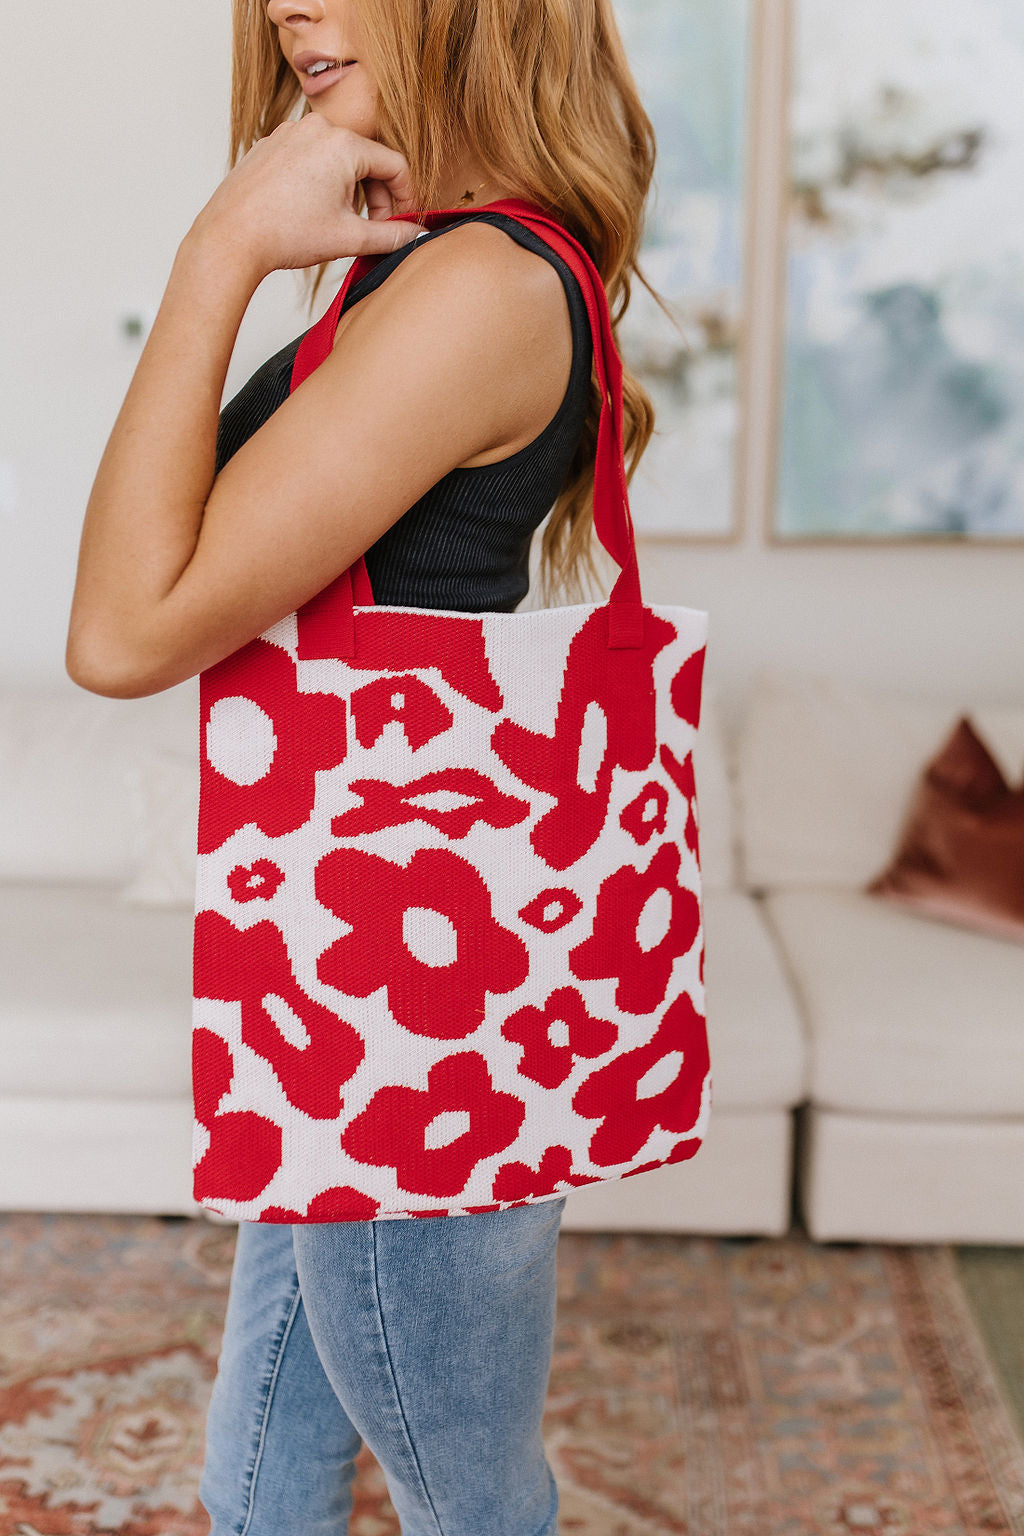 Daisy Tote Bag - Red - Inspired Eye Boutique